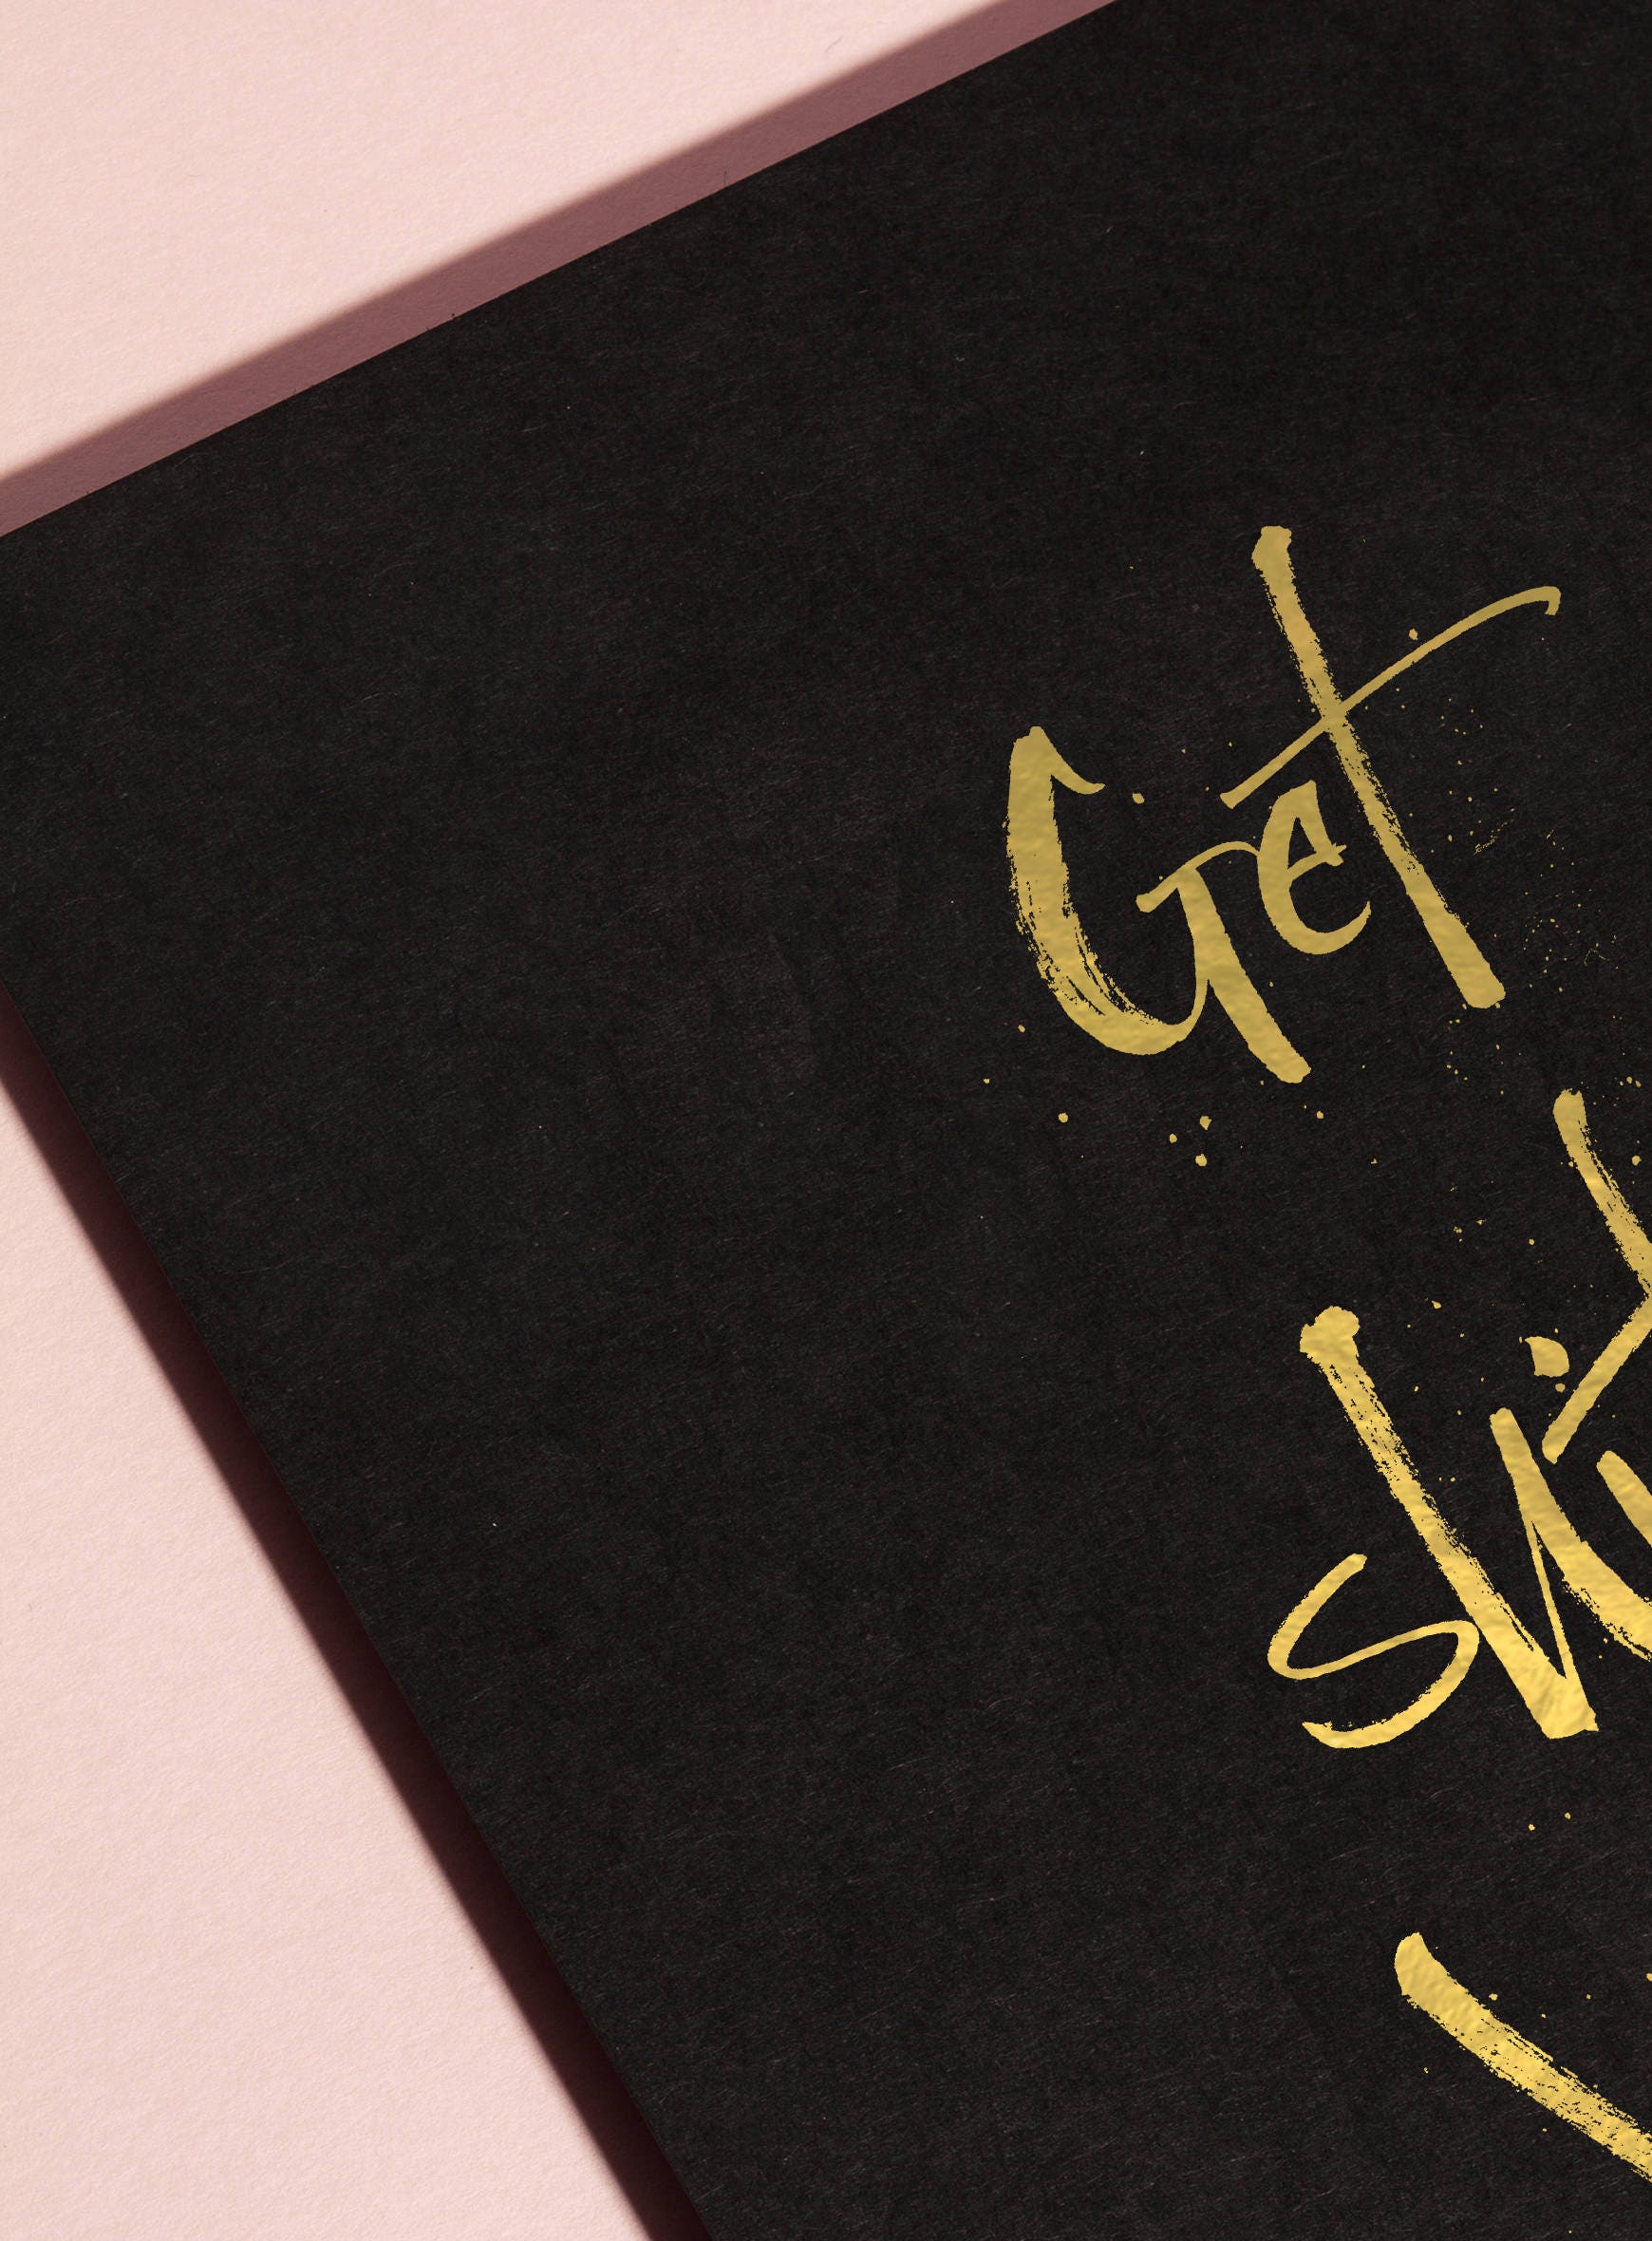 Get Shit Done Print - Gold Foil Calligraphy - Motivational Quote - Inspirational Home Decor